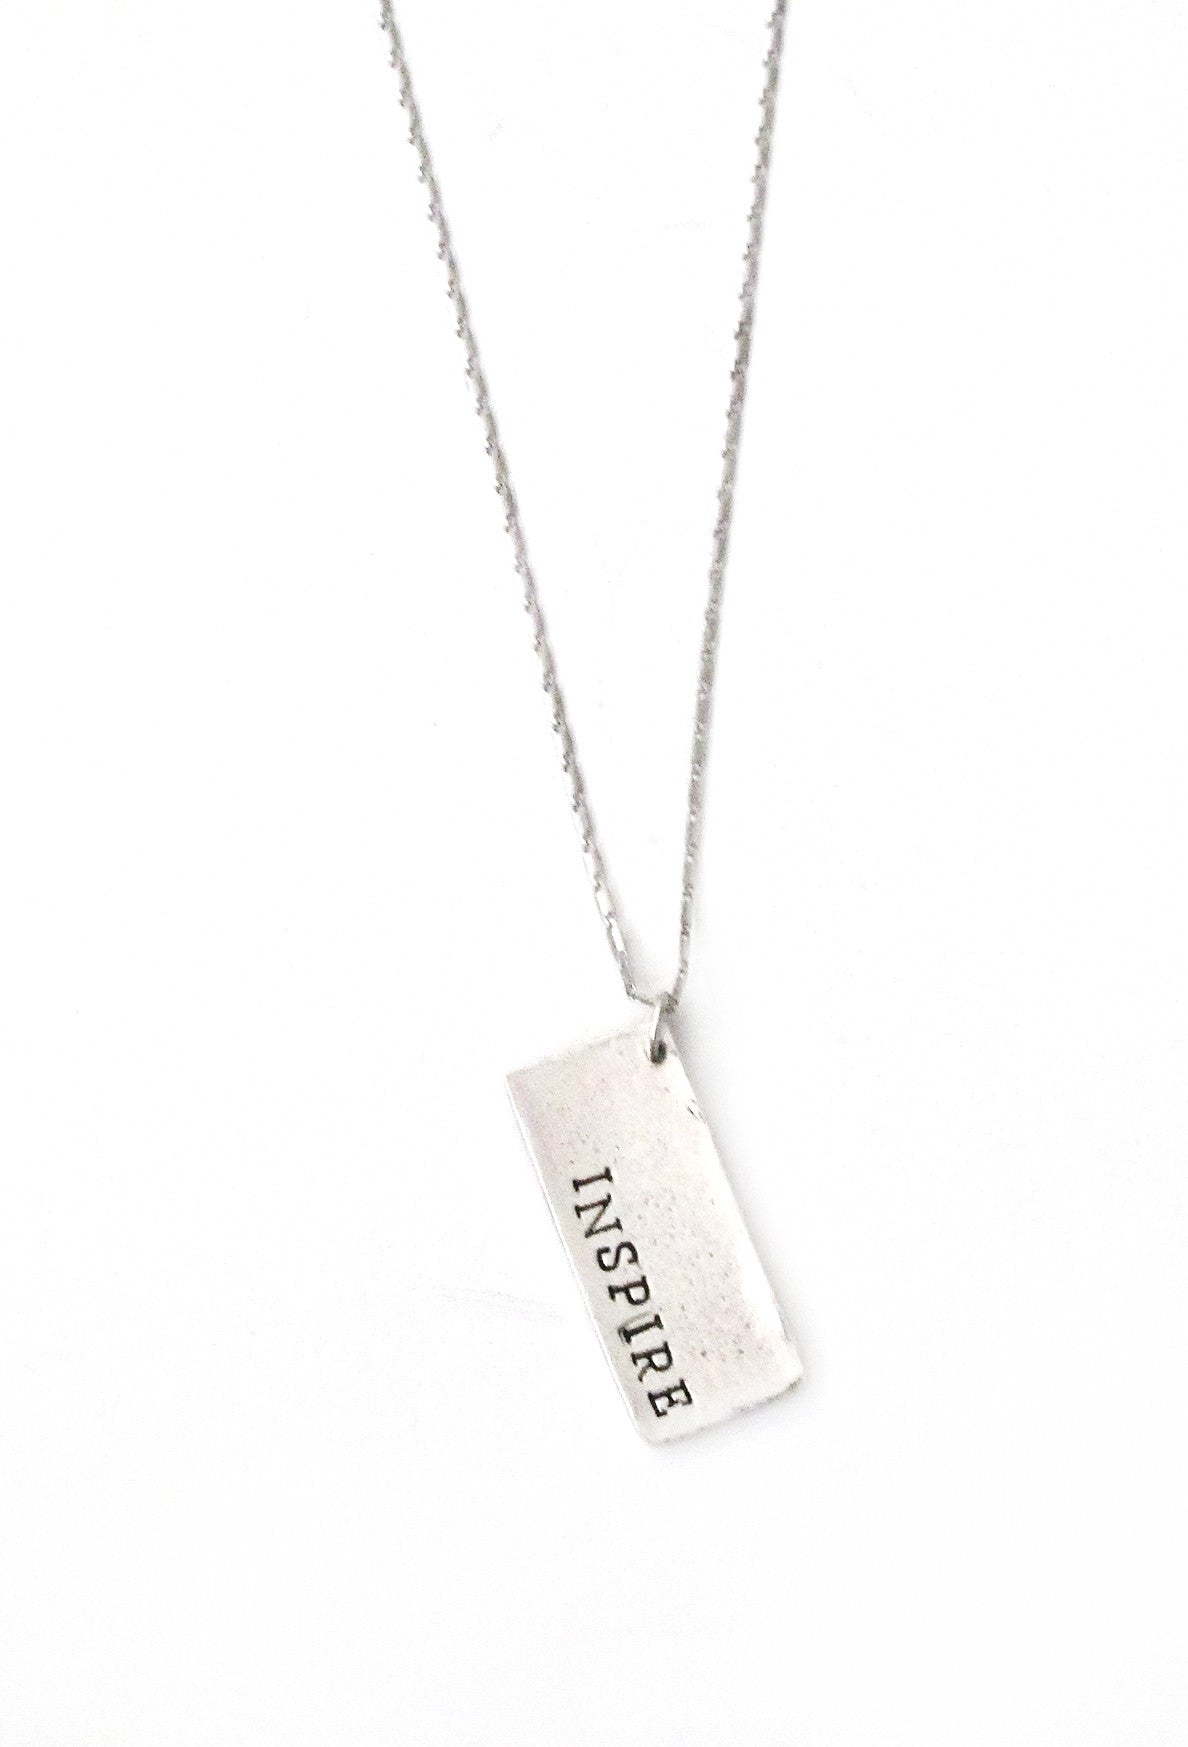 Inspire Hand Stamped Necklace